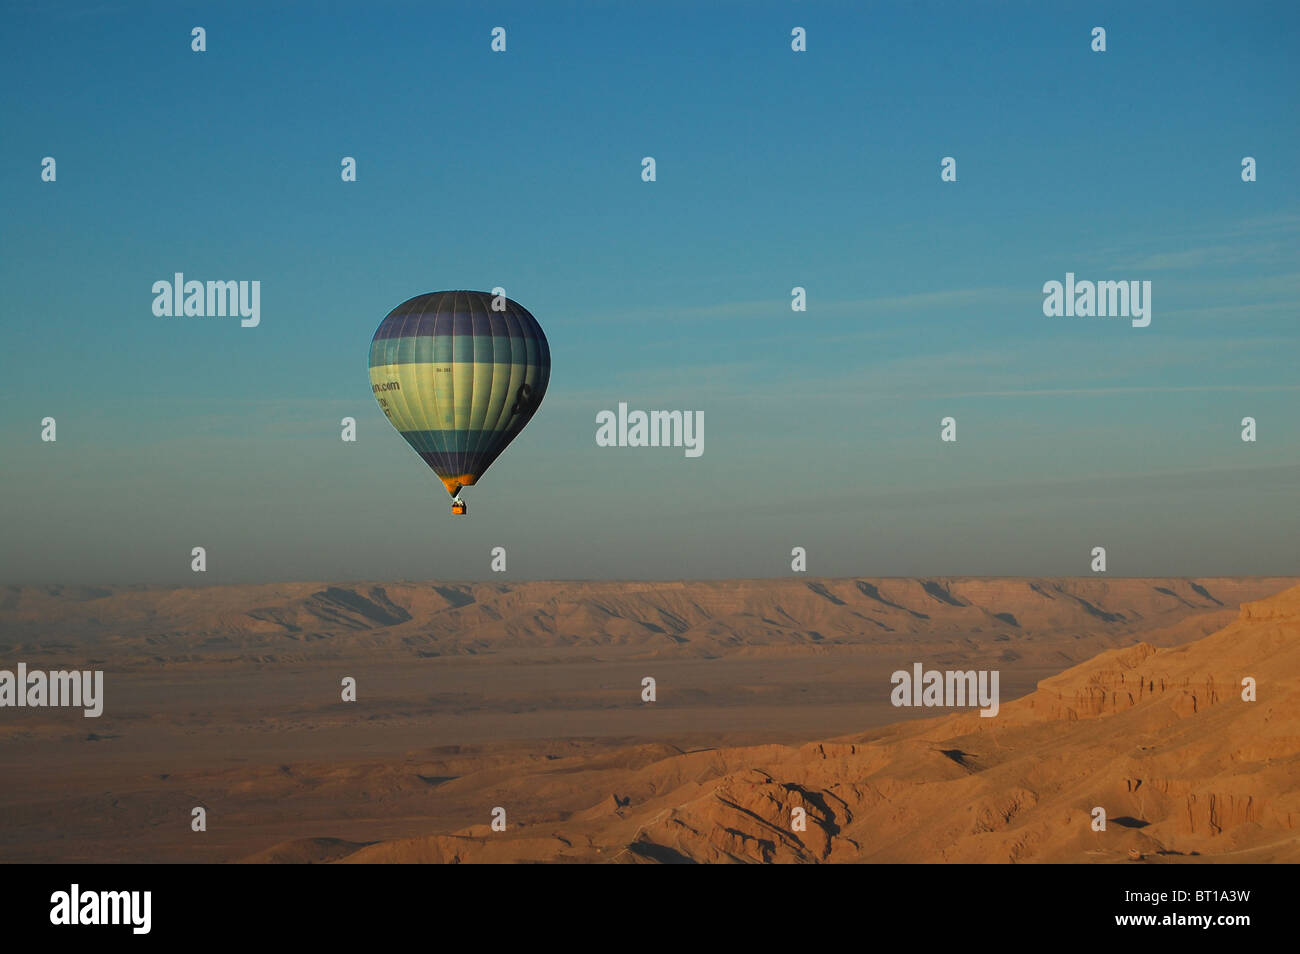 Hot air balloon ride above the Valley of the Kings, Luxor, Egypt at dawn Stock Photo